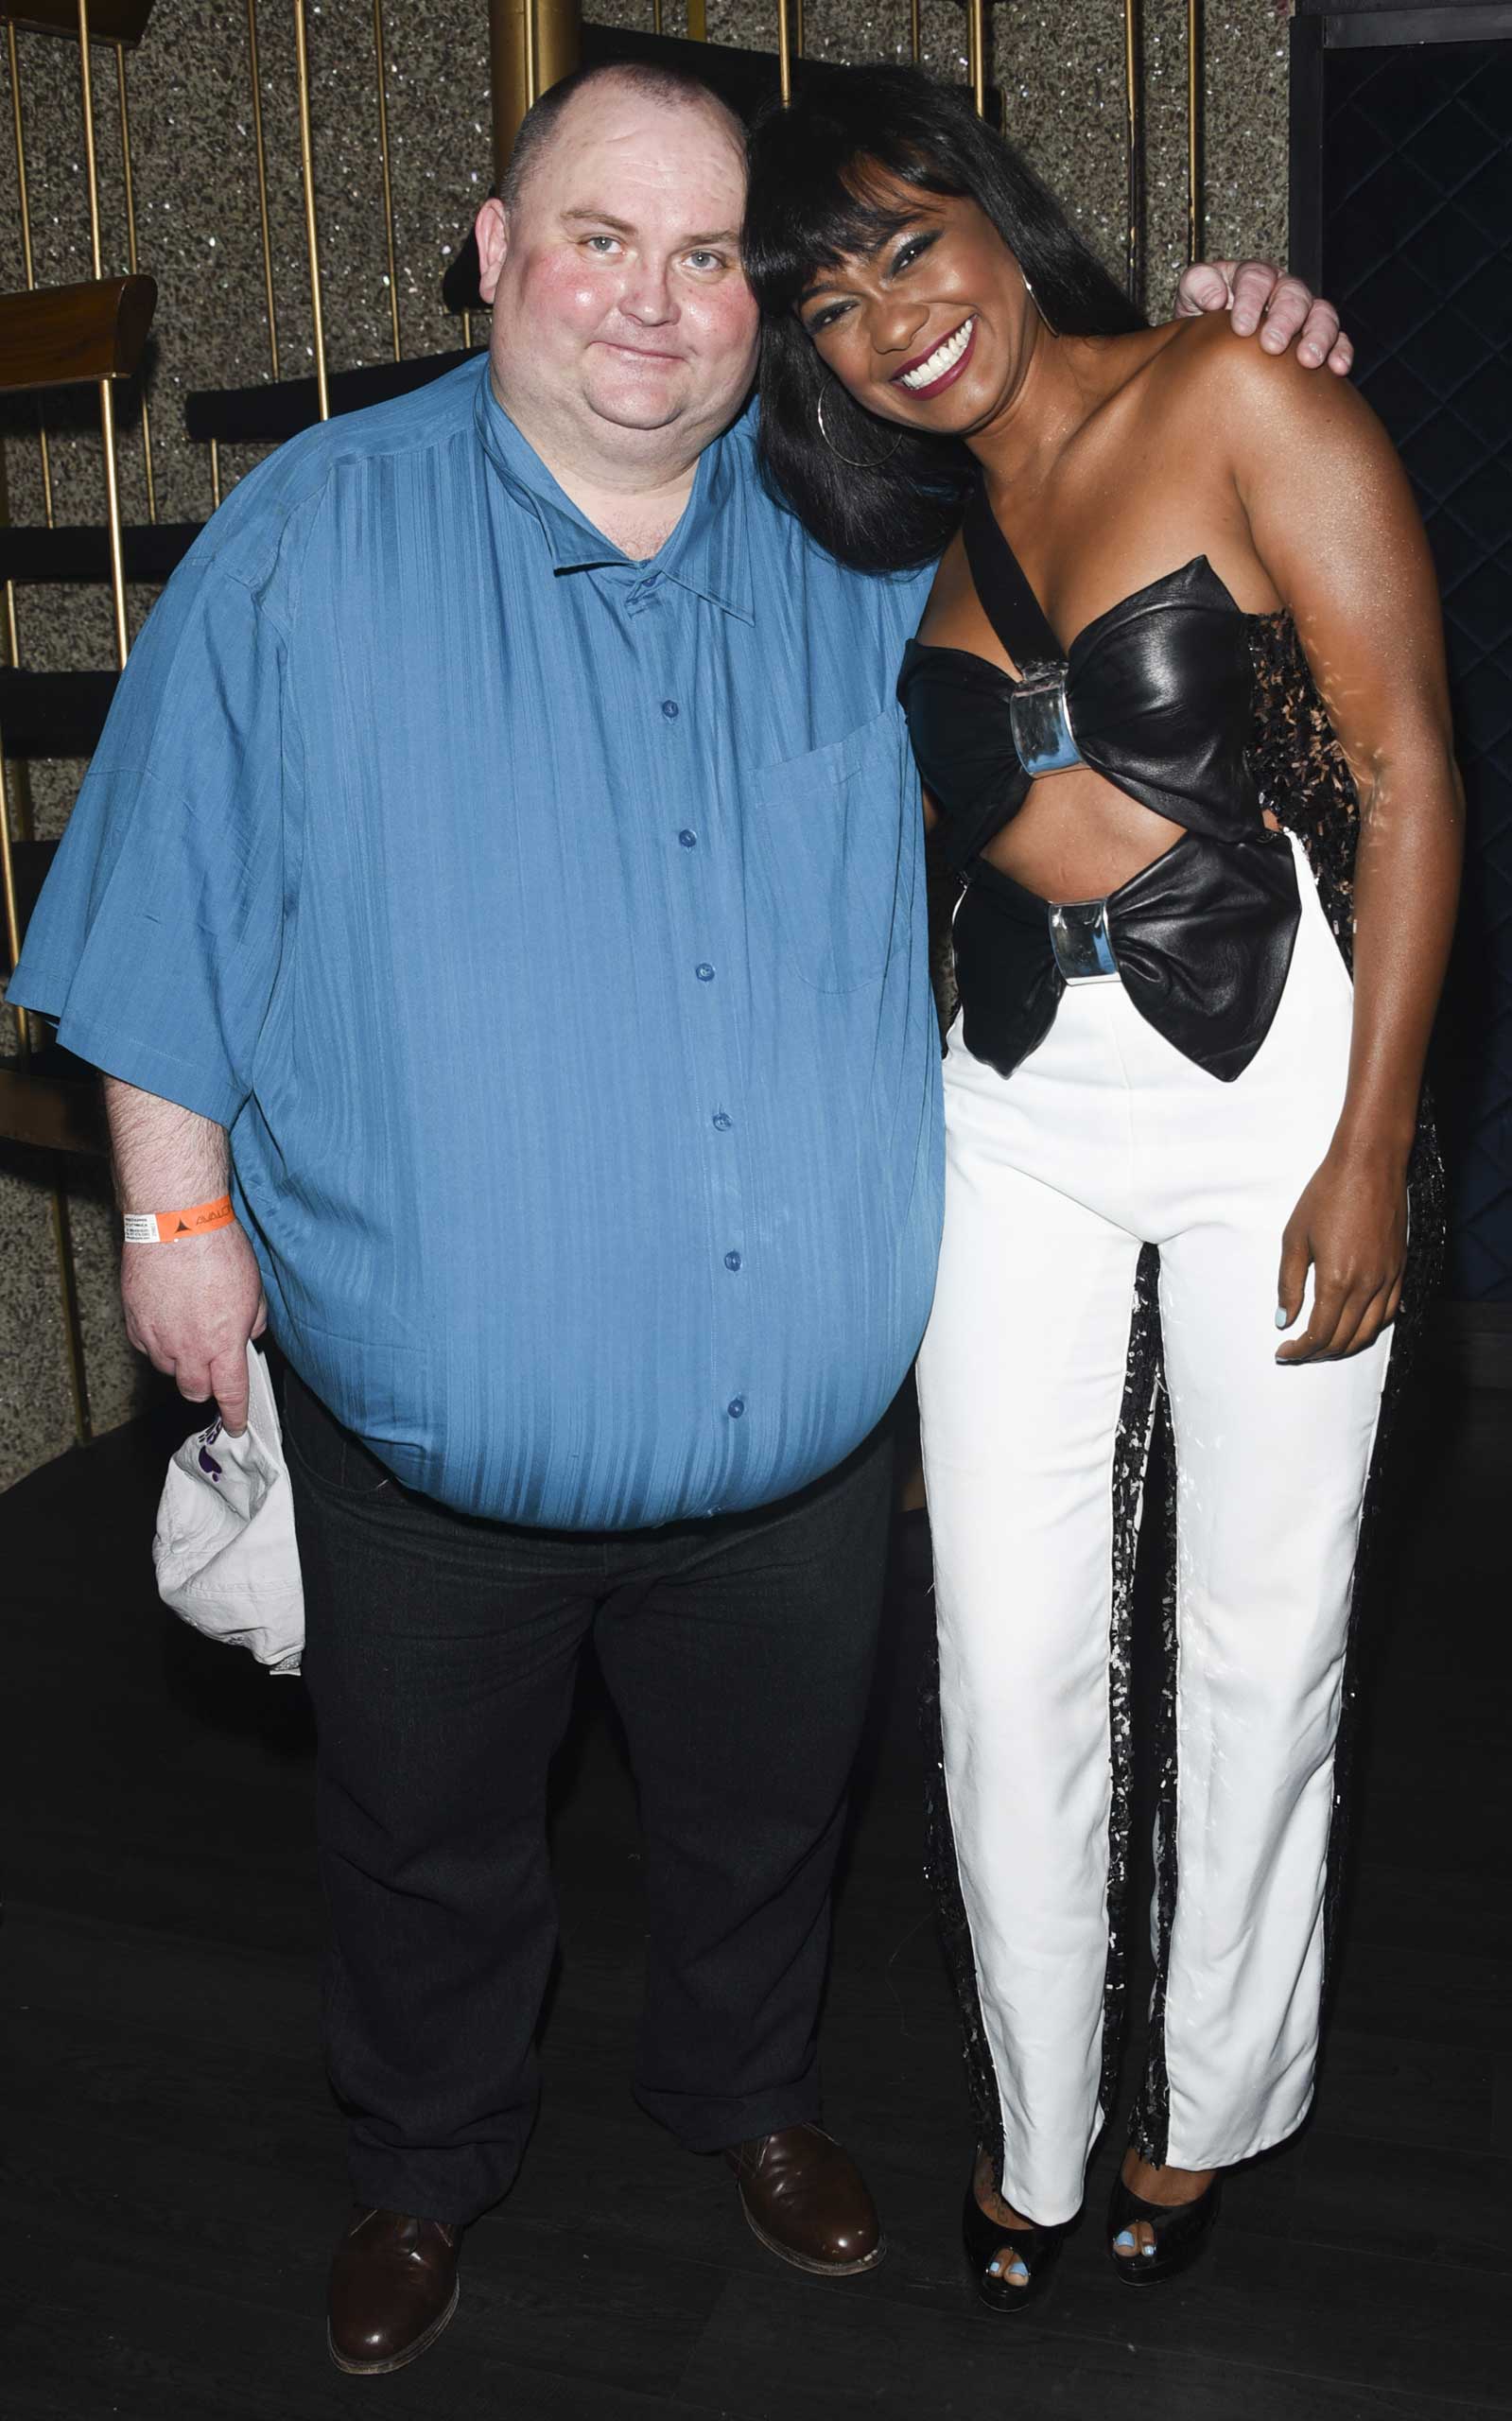 Dancing man Sean O'Brien and Actress Tatyana Ali attend Avalon Hollywood on May 23, 2015 in Los Angeles. (Michael Bezjian—Getty Images)